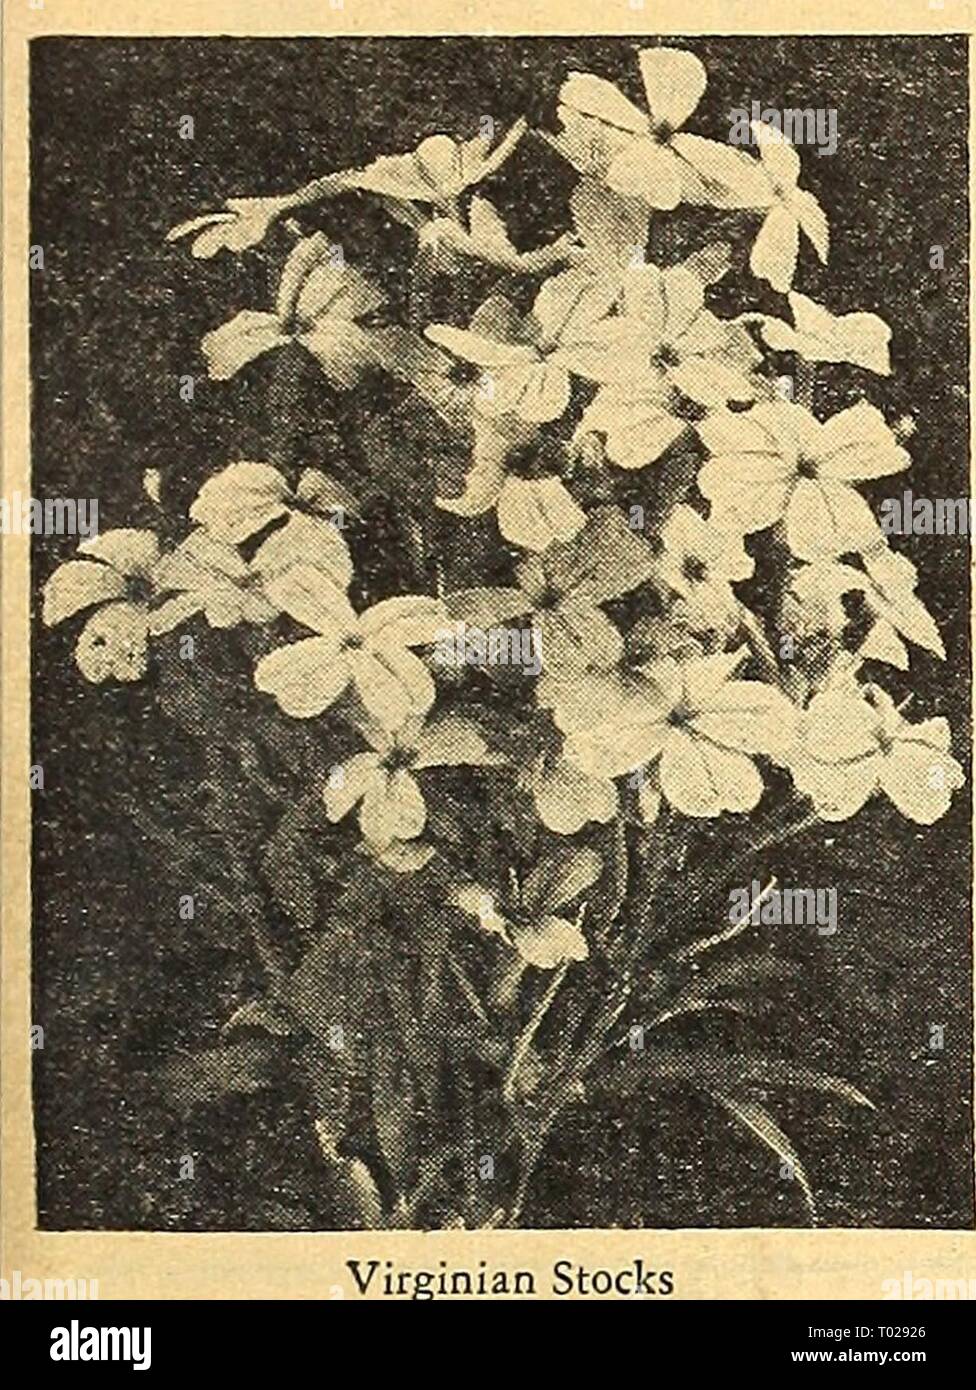 Dreer's garden book for 1946 : faithful for over a century . dreersgardenbook1946henr Year: 1946  Veronica—Speedwell [hp] 4379 Incana. Bushy plants 2 ft. tall. Porcelain blue flowers in summer. Pkt. 2Sc; large pkt. 7Sc. 4380 Longifolia. Beautiful deep lav- ender-blue flowers in long racemes during the summer on bushy plants 2 ft. tall. Plct. ISc; large pkt. 40c. 4385 Spicata. Graceful IJ^ ft. plants with bright blue flowers in summer. Pkt. ISc; large pkt. 40c.    Virginian Stocks Virginian Stocks ® Malcomia niaritima 4444 Mixed. This old-fashioned hardy annual blooms profusely during late spri Stock Photo